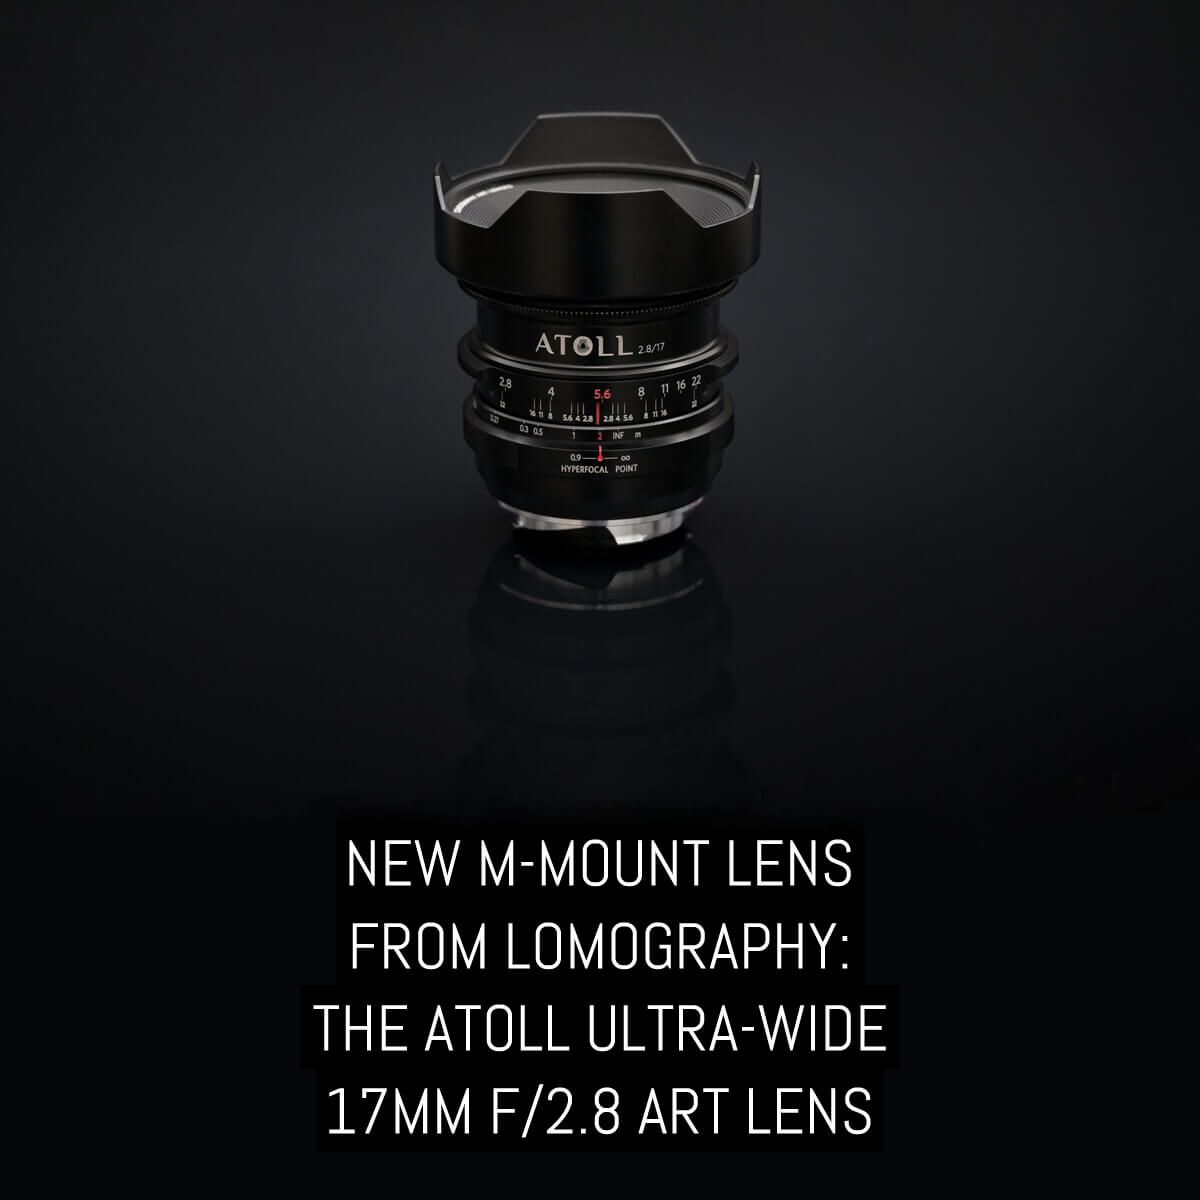 New M-mount lens from Lomography: The Atoll Ultra-Wide 17mm f/2.8 Art Lens